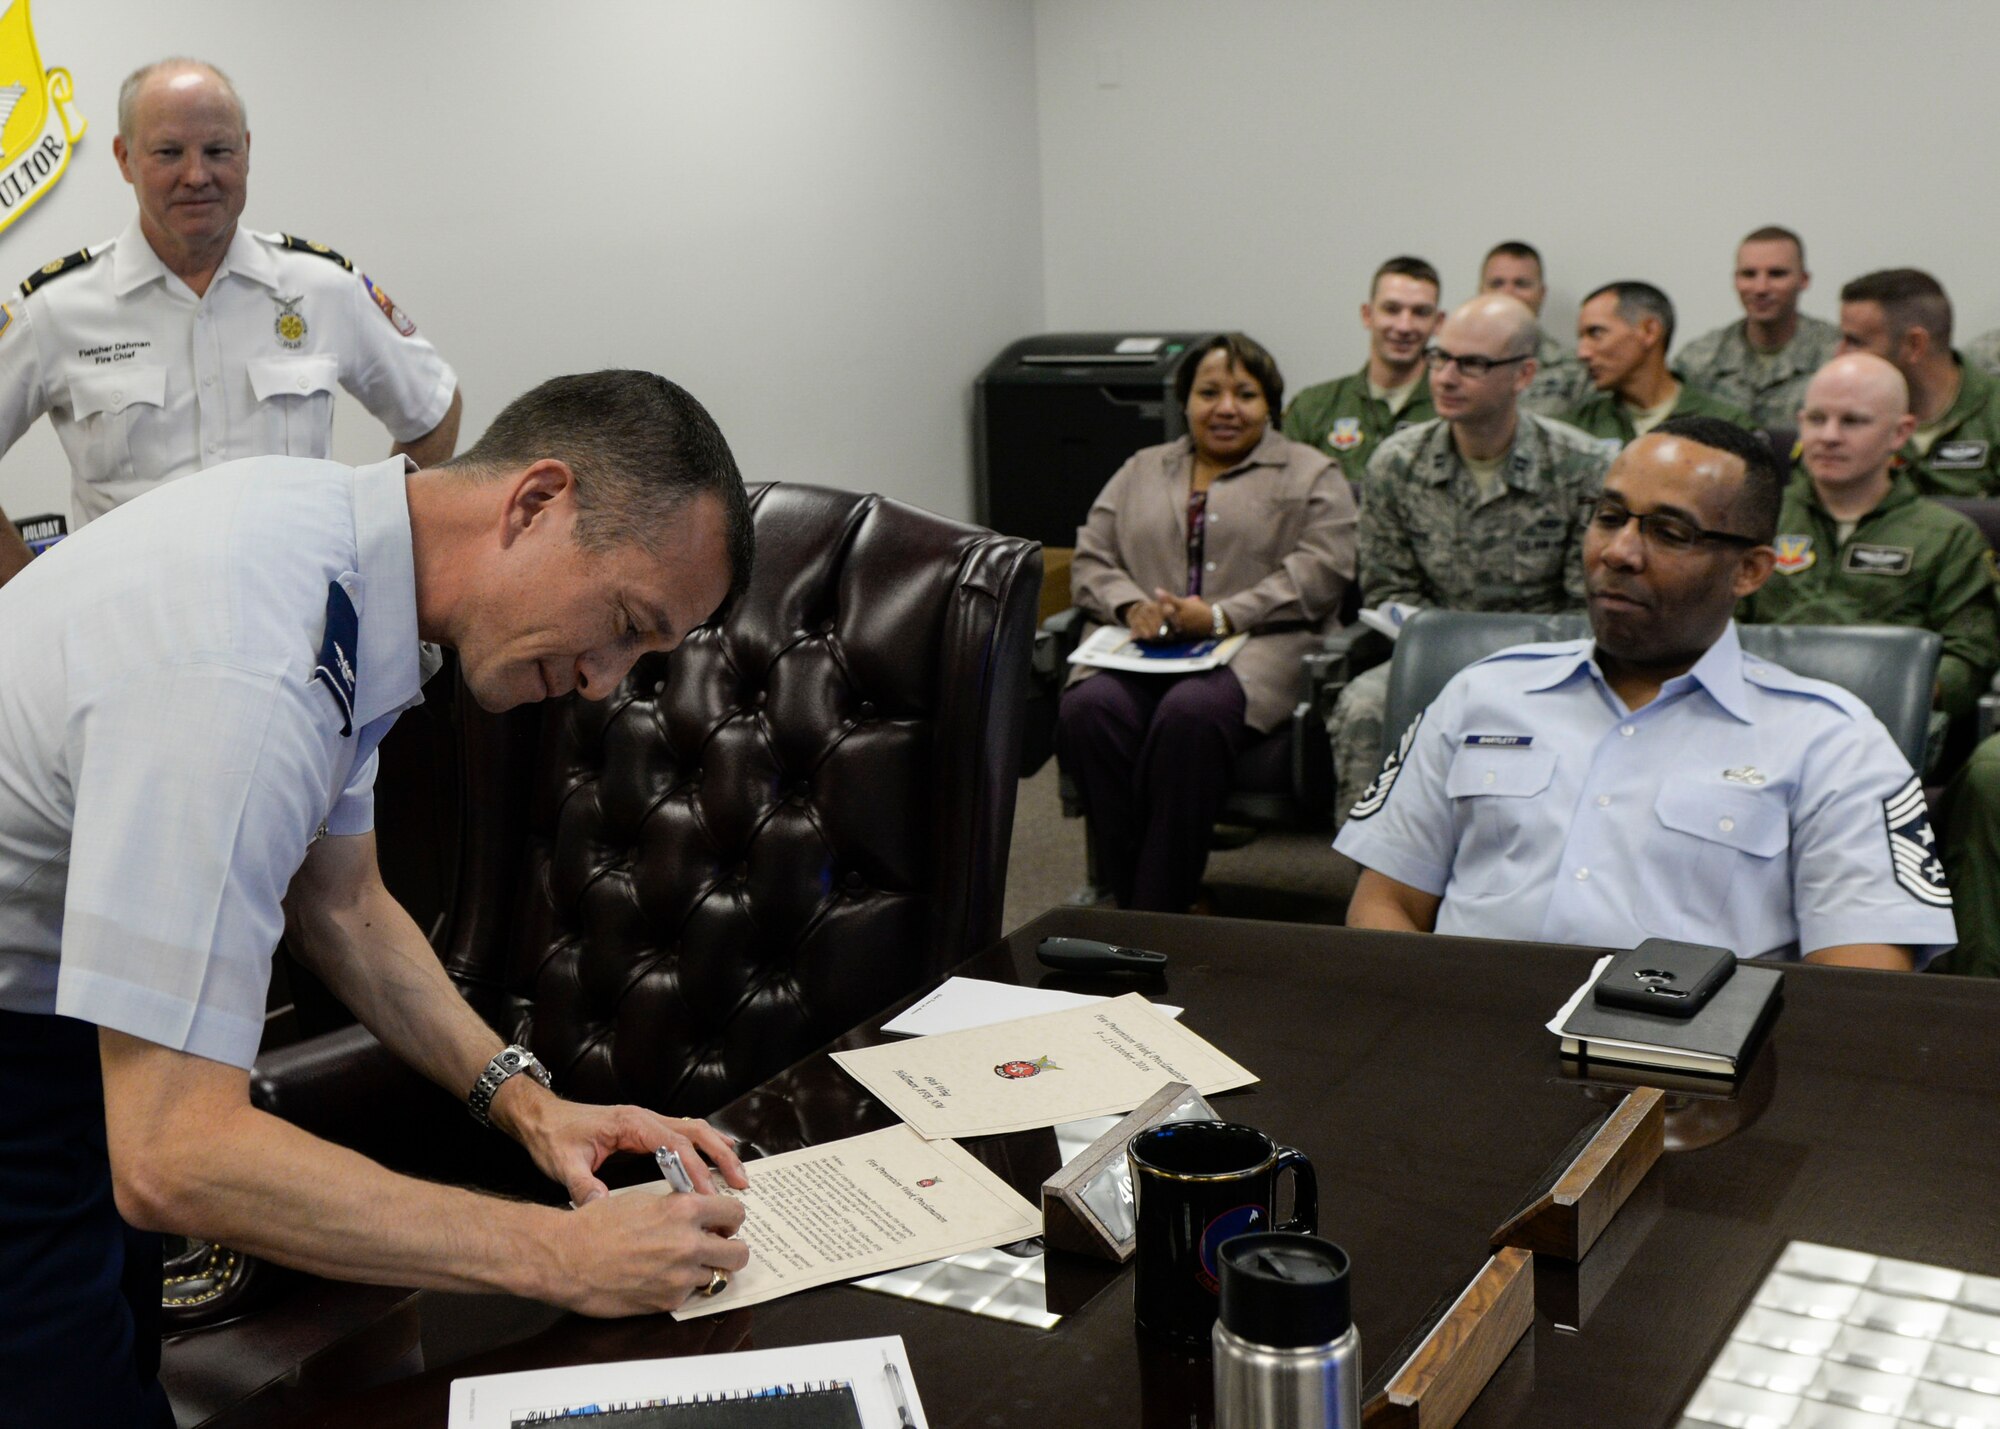 Col. Houston Cantwell, the 49th Wing Commander, signs the Fire Prevention Week proclamation at Holloman Air Force Base, N.M. on Oct. 9, 2016. Holloman Air Force Base’s Fire Prevention Week is annually practiced in commemoration of the great Chicago Fire of 1871. Members with the 49th Civil Engineer Squadron Fire Protection Flight performed fire drills, and educated people on proper use of a fire extinguisher and the importance of changing out batteries in smoke alarms every six months. (U.S. Air Force photo by Airman 1st Class Alexis P. Docherty)